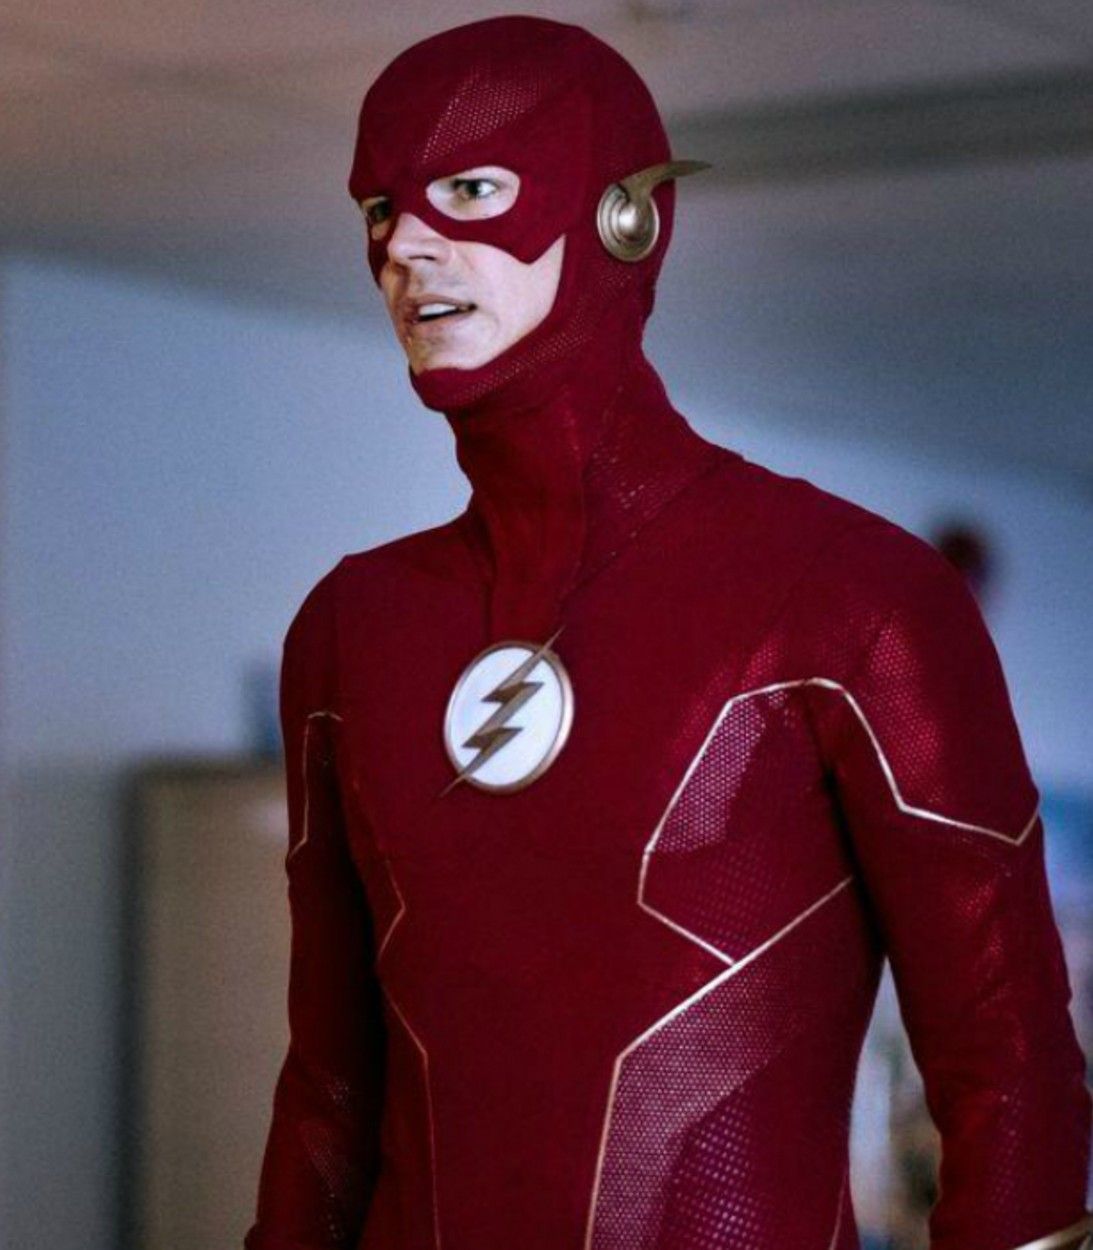 The Flash Arrowverse image vertical